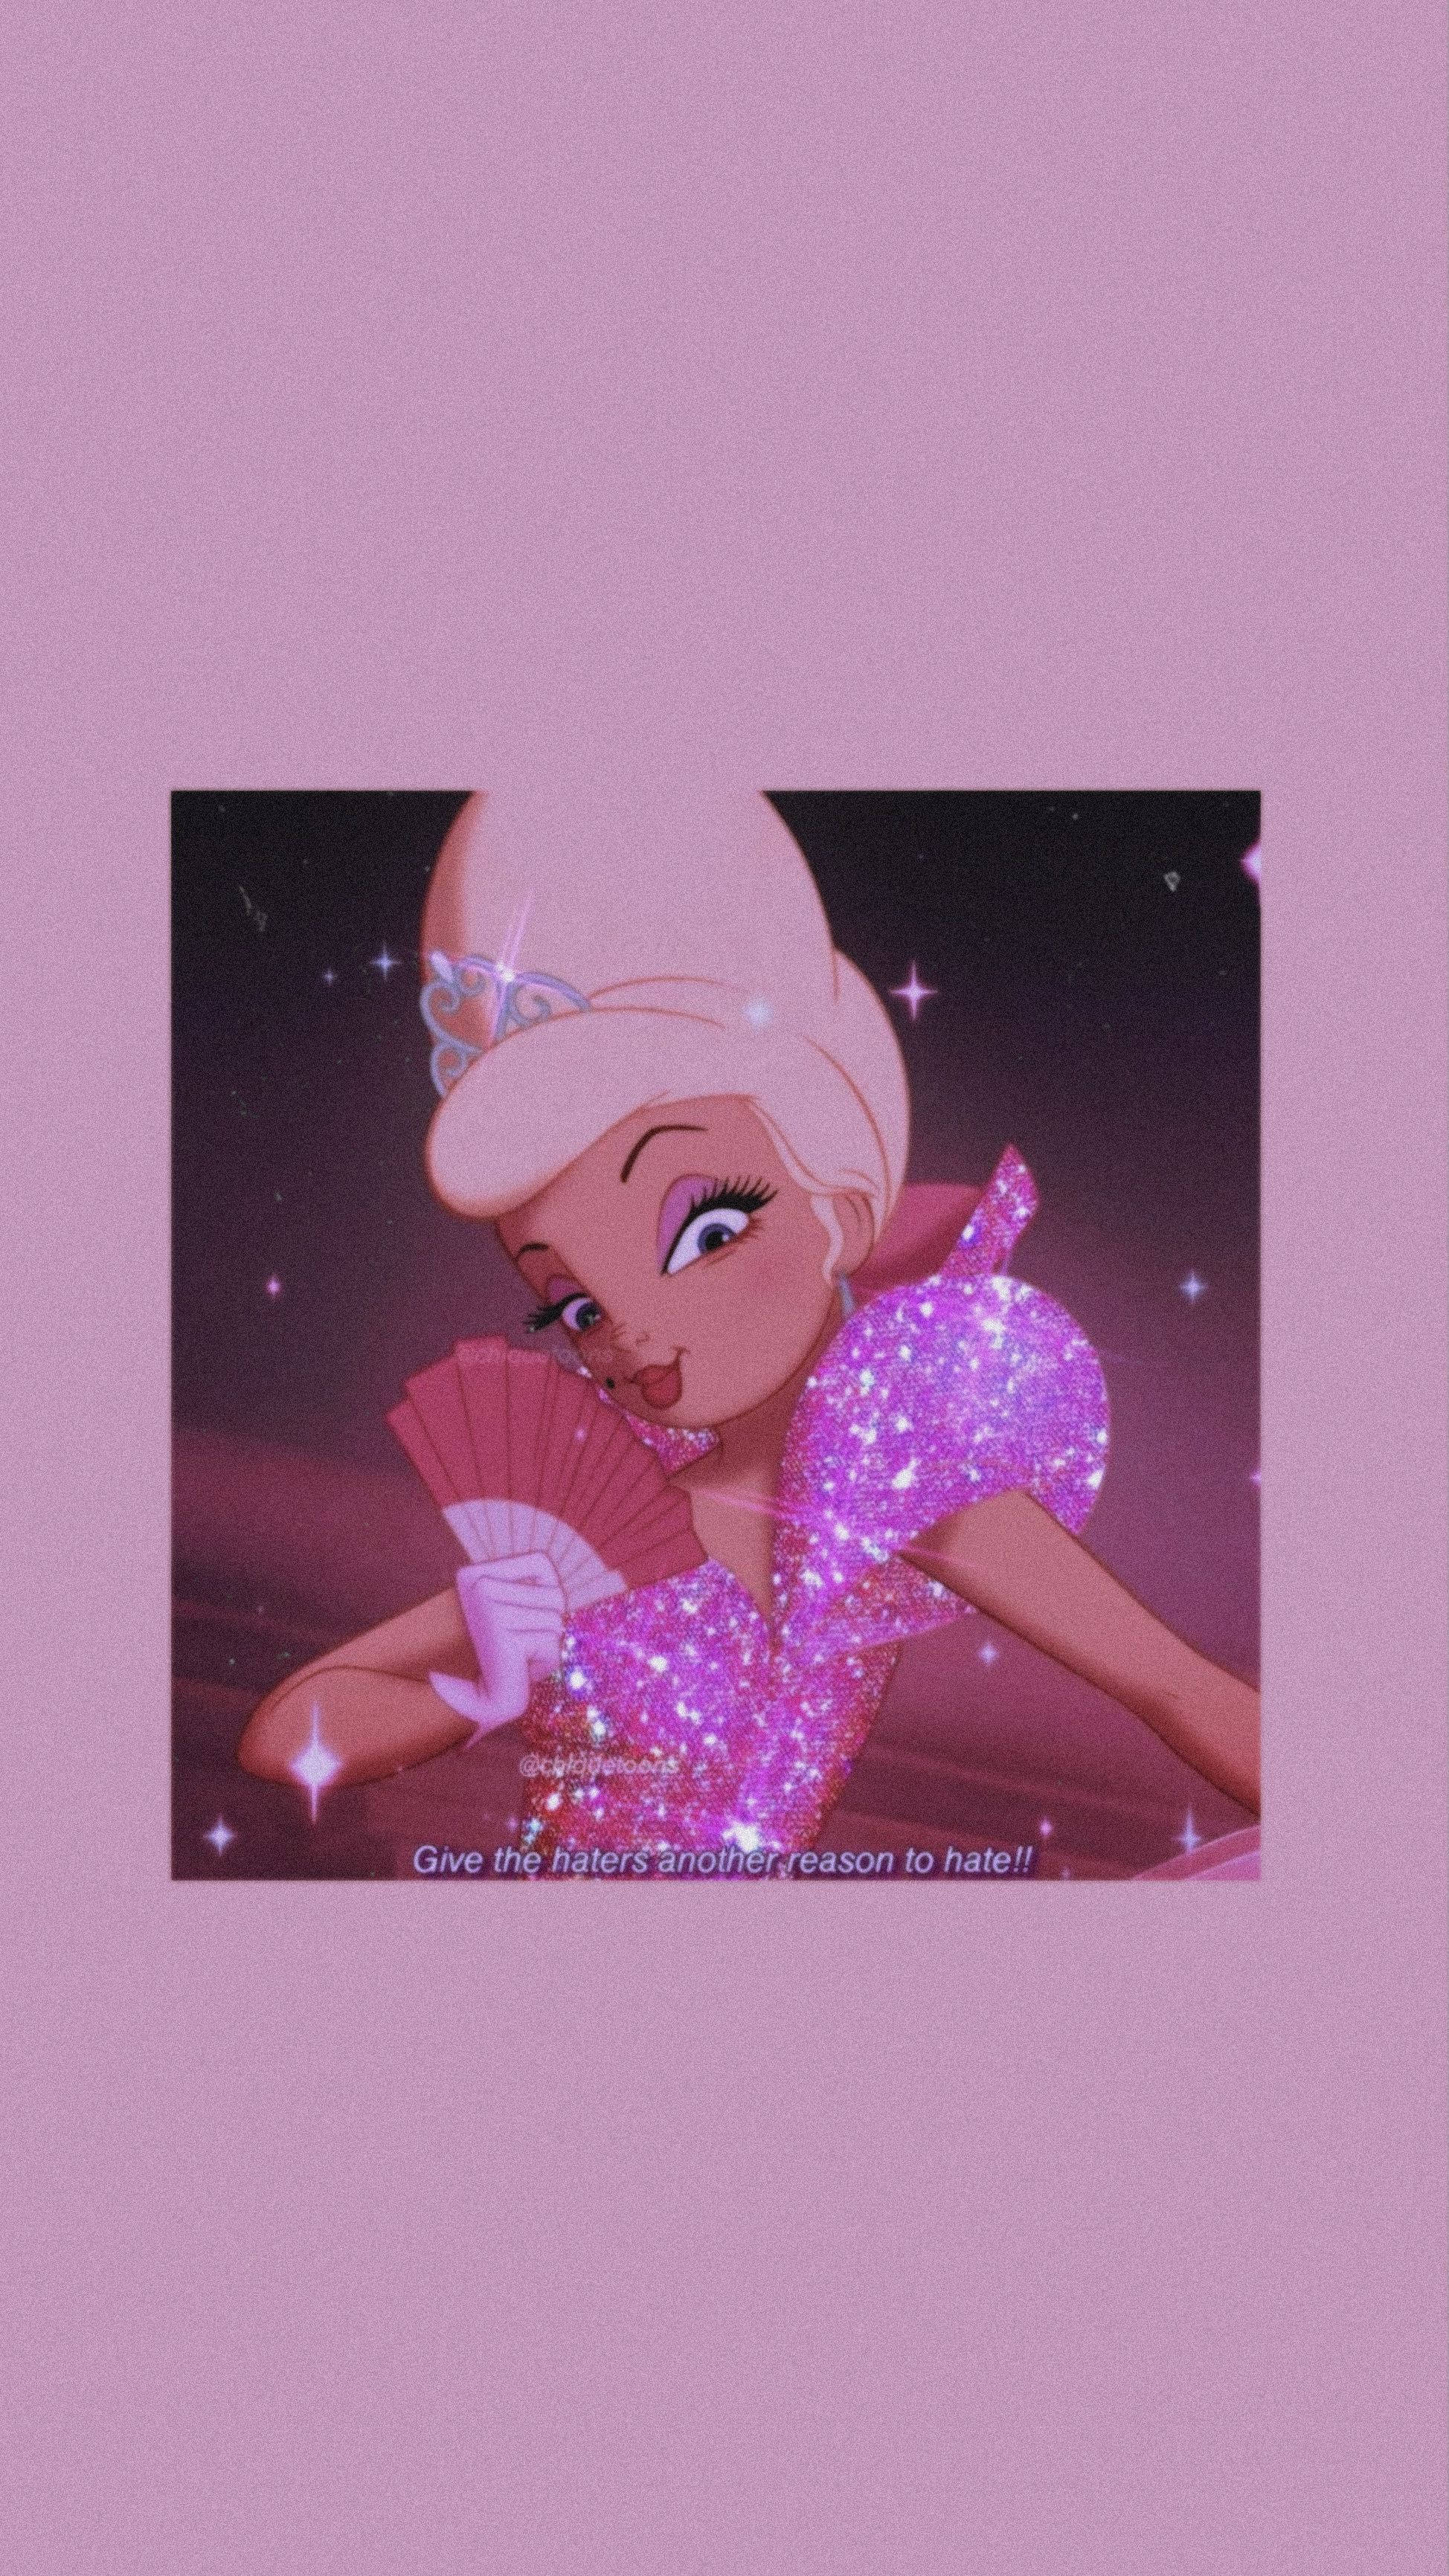 Aesthetic Disney wallpaper, pink background with a picture of Eudora from The Hunchback of Notre Dame. - Baddie, princess